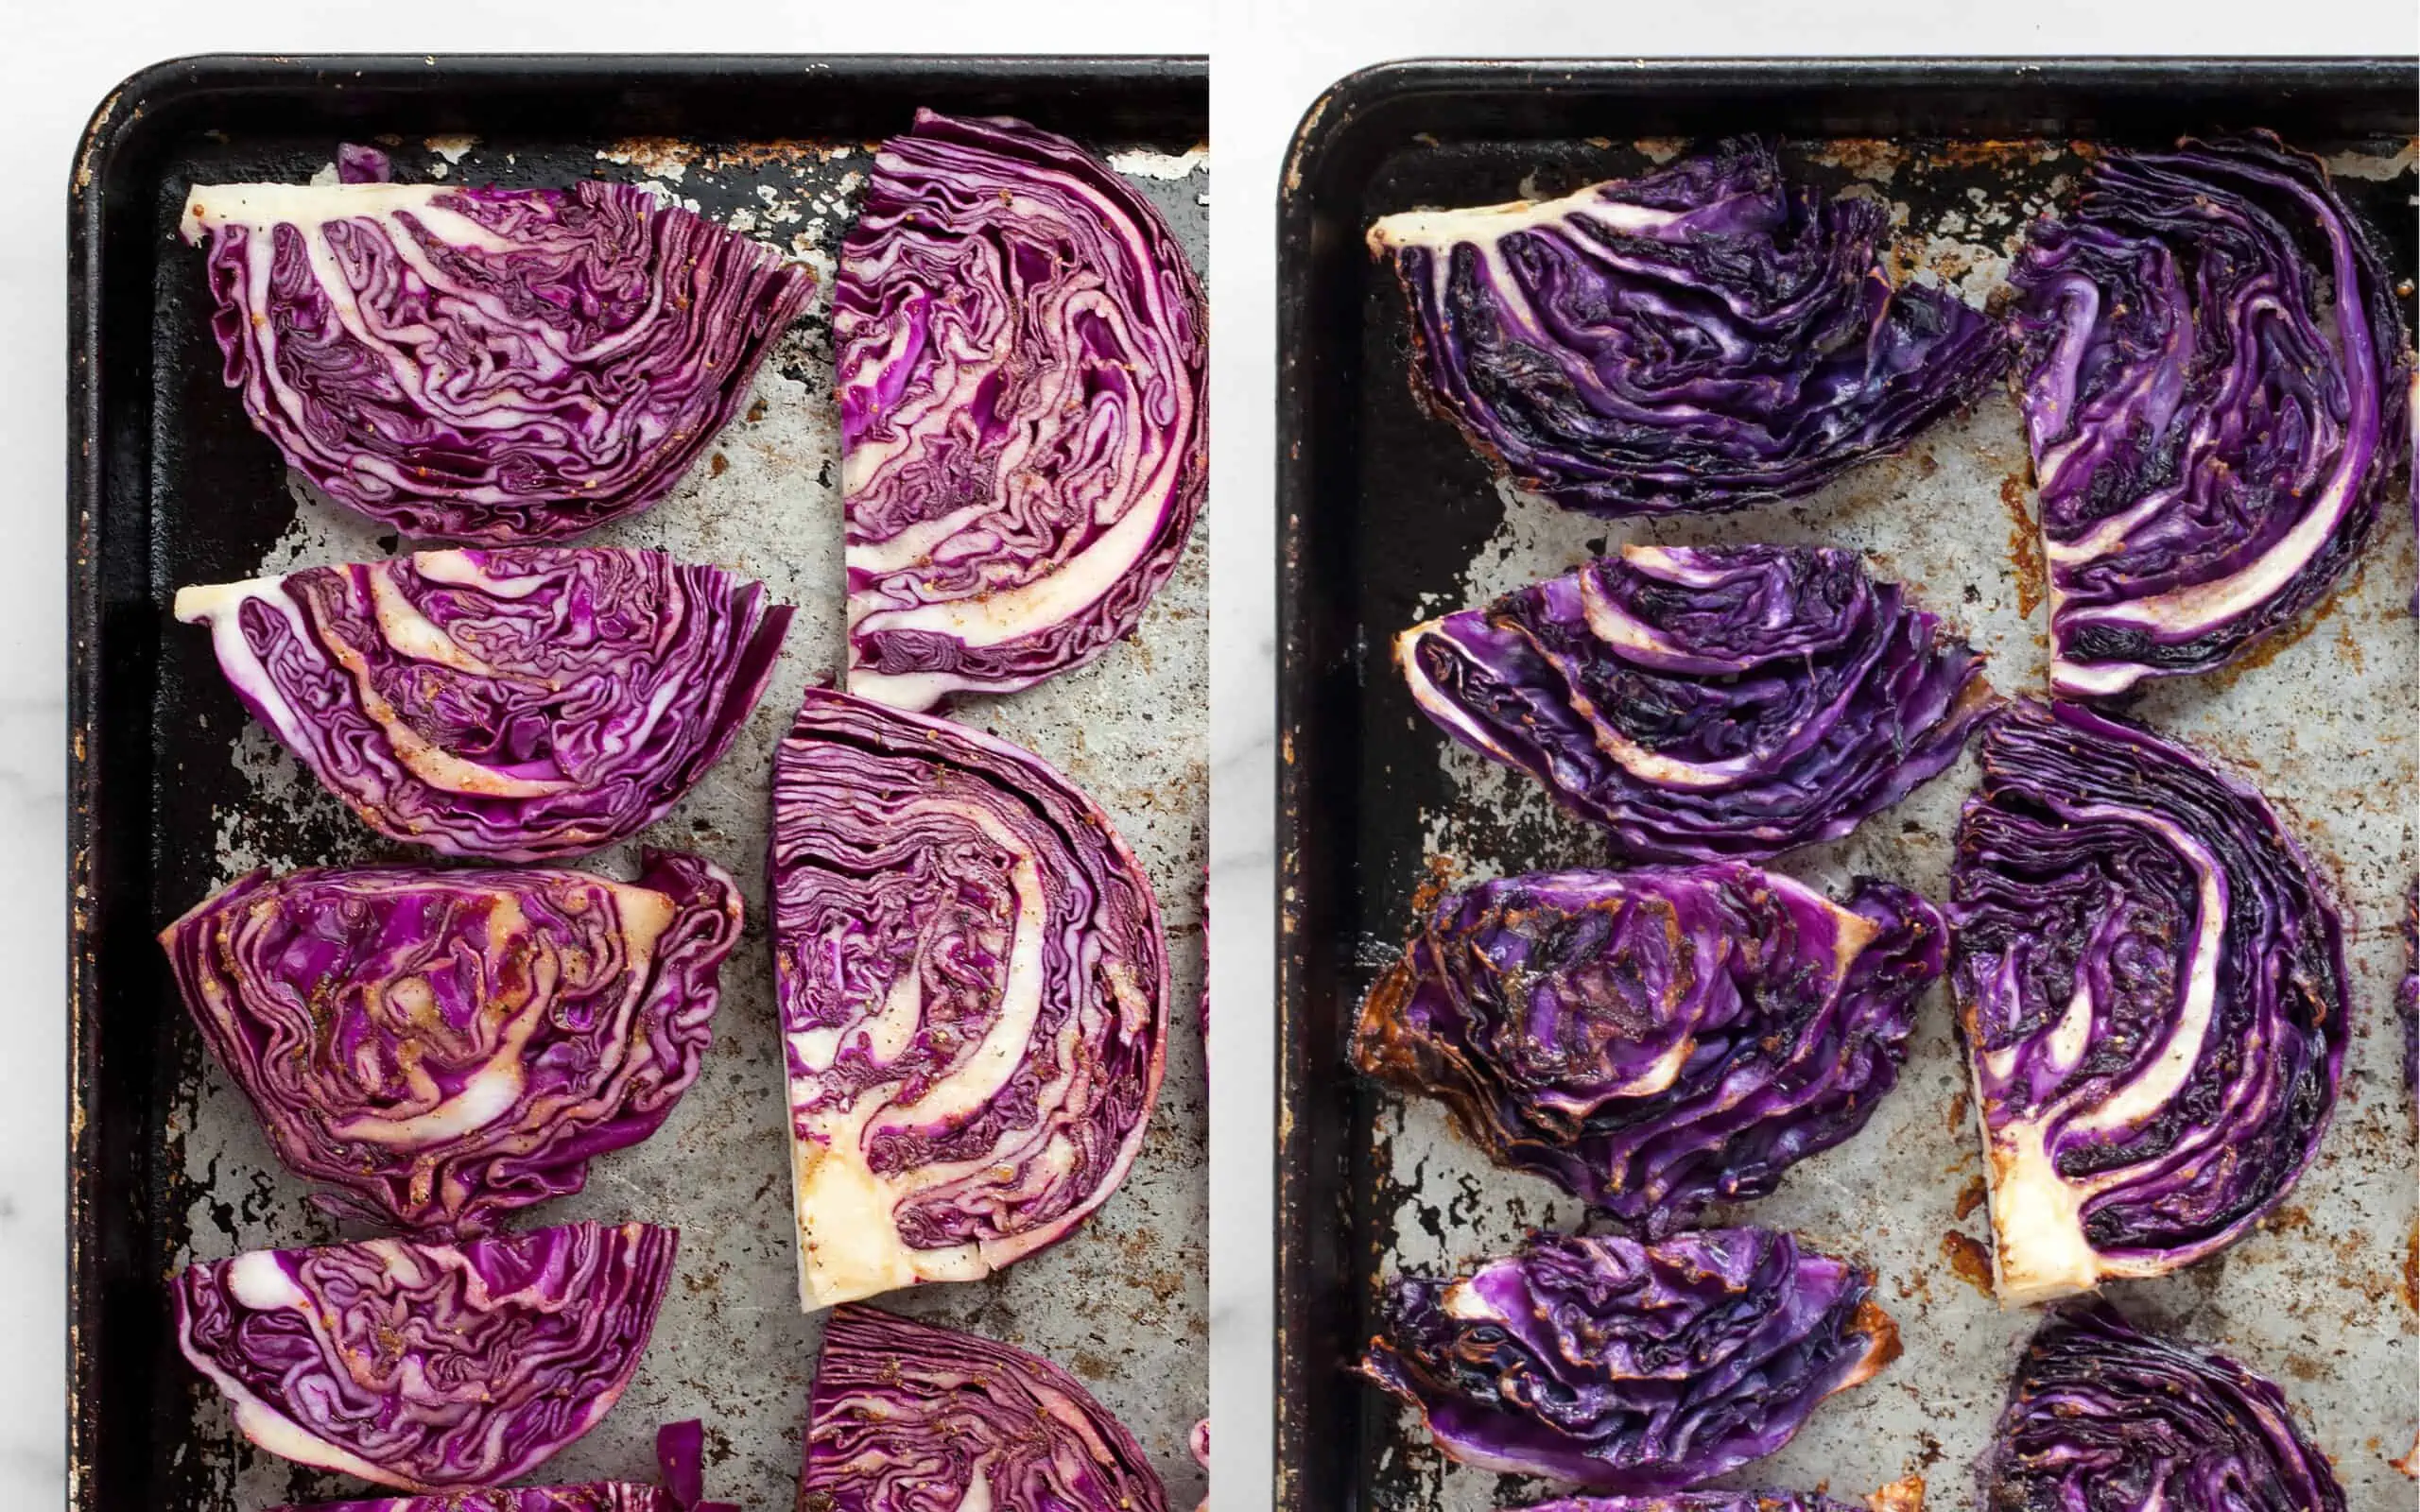 marinated raw cabbage on a sheet pan, and roasted cabbage slices on another sheet pan.